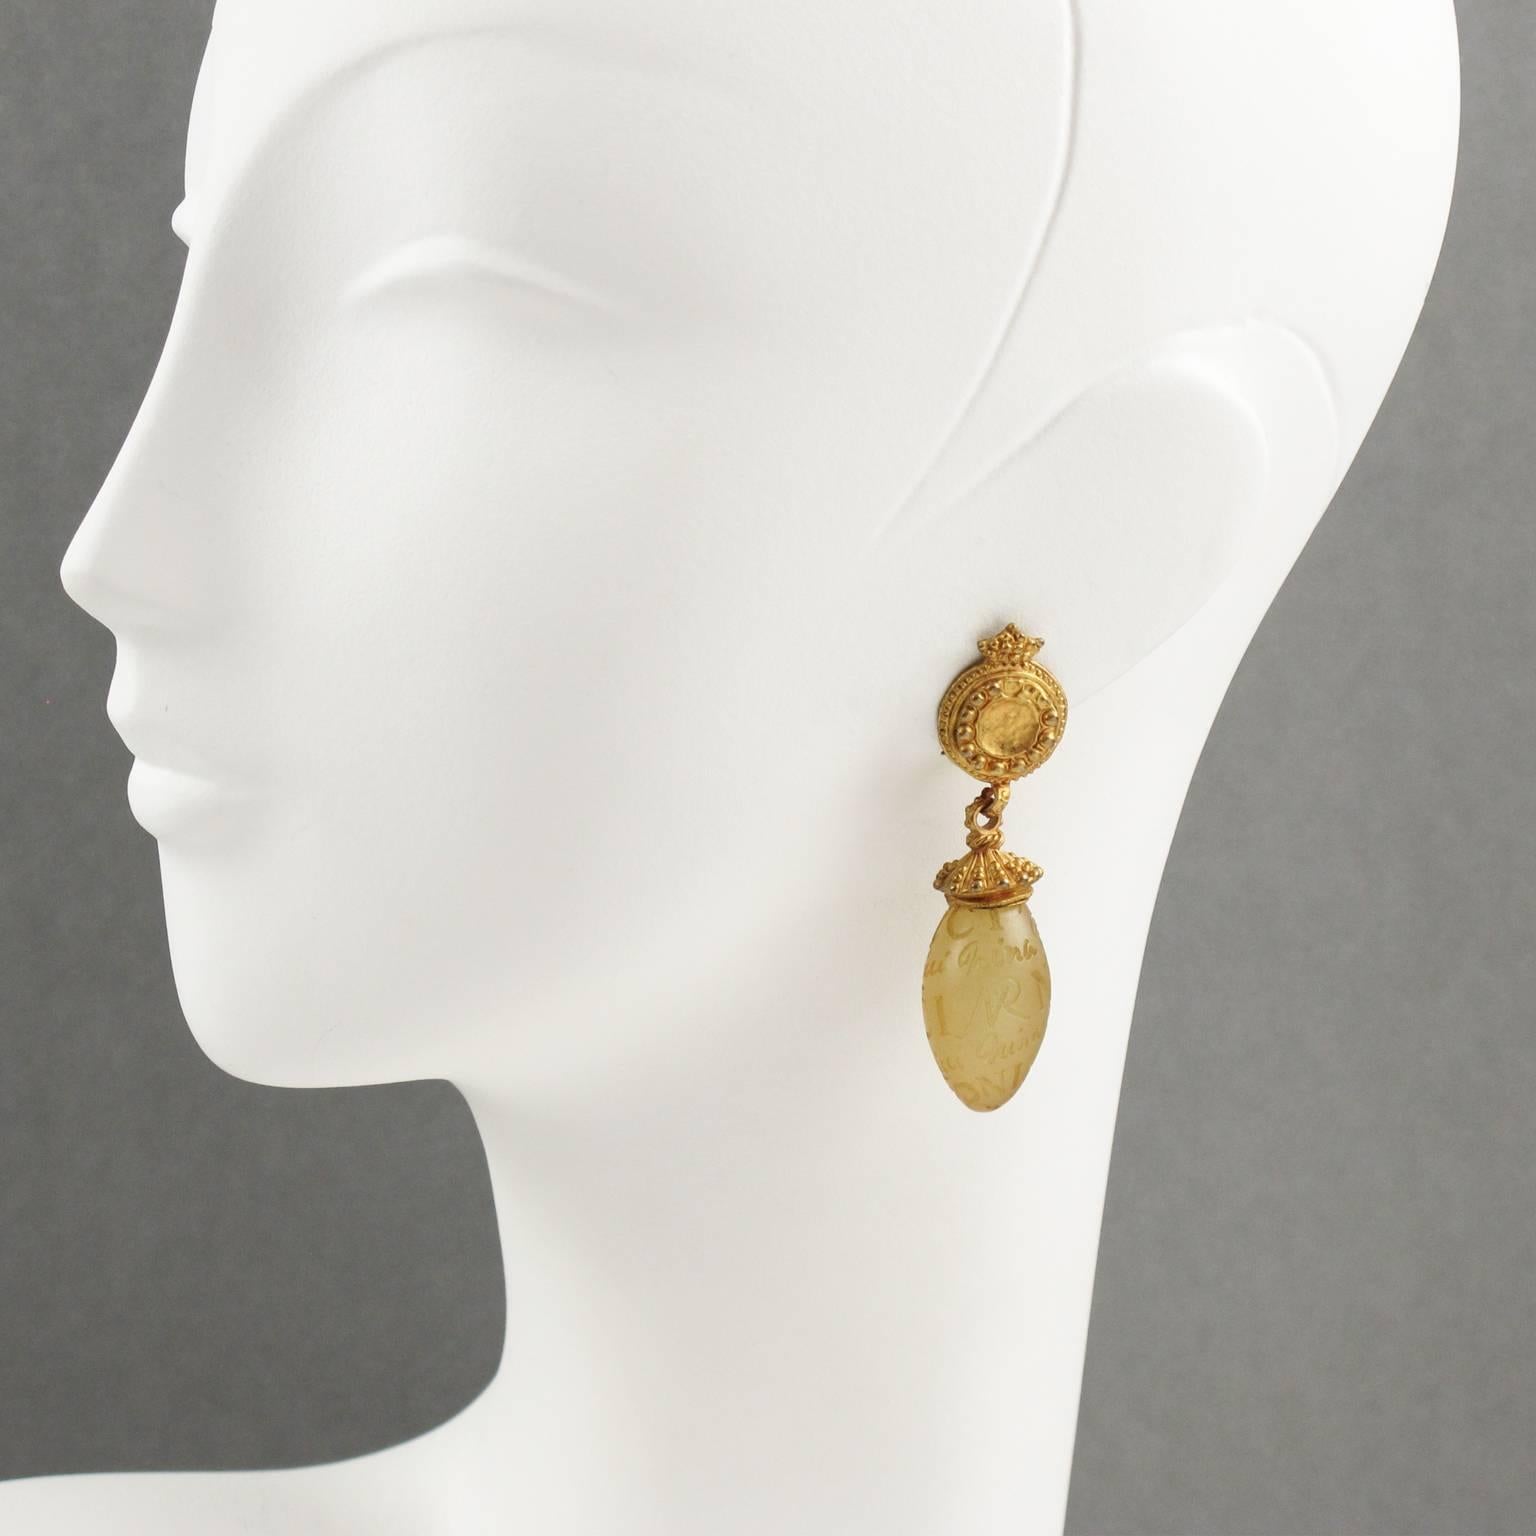 Lovely vintage 1990s Nina Ricci Paris signed dangling clip on earrings. Classic and beautiful jewelry piece, featuring tear drop shape with gilt metal all textured in a brushed finish aspect compliment with resin drop bead in translucent champagne